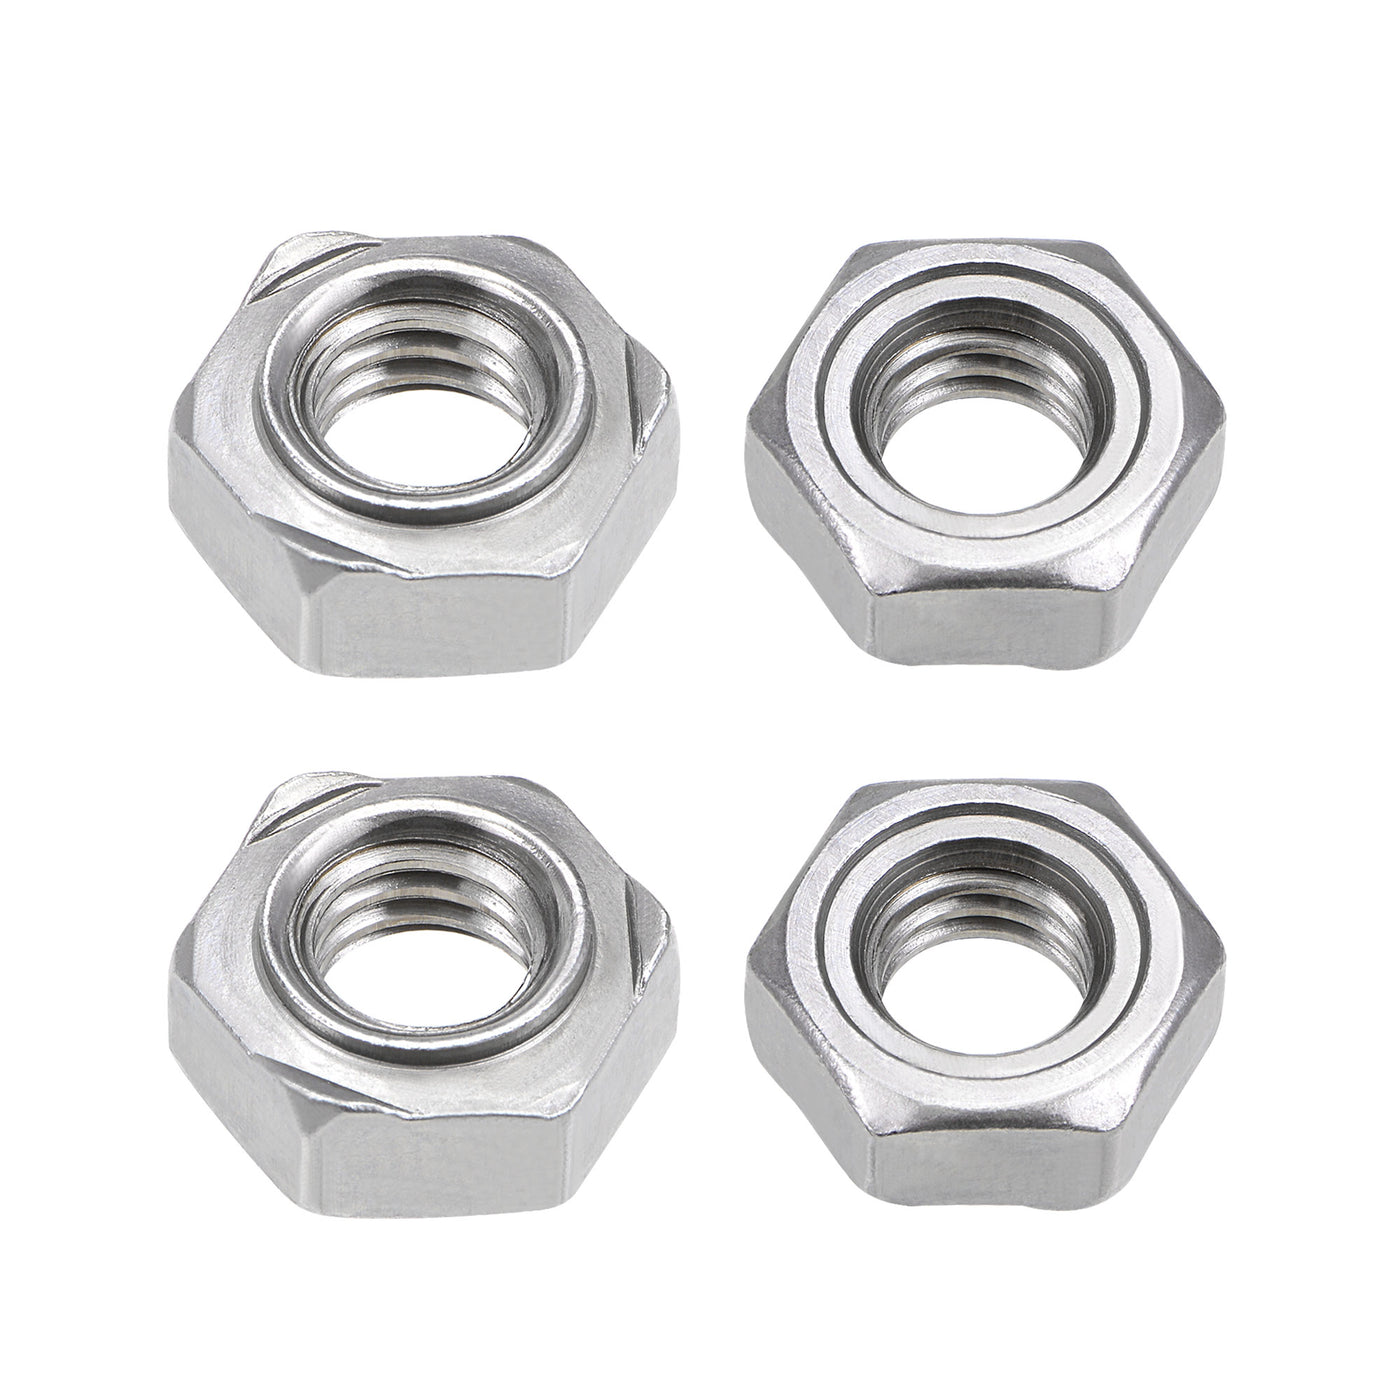 Uxcell Uxcell Hex Weld Nuts,1/2-13 Carbon Steel with 3 Projections Machine Screw Gray 4pcs